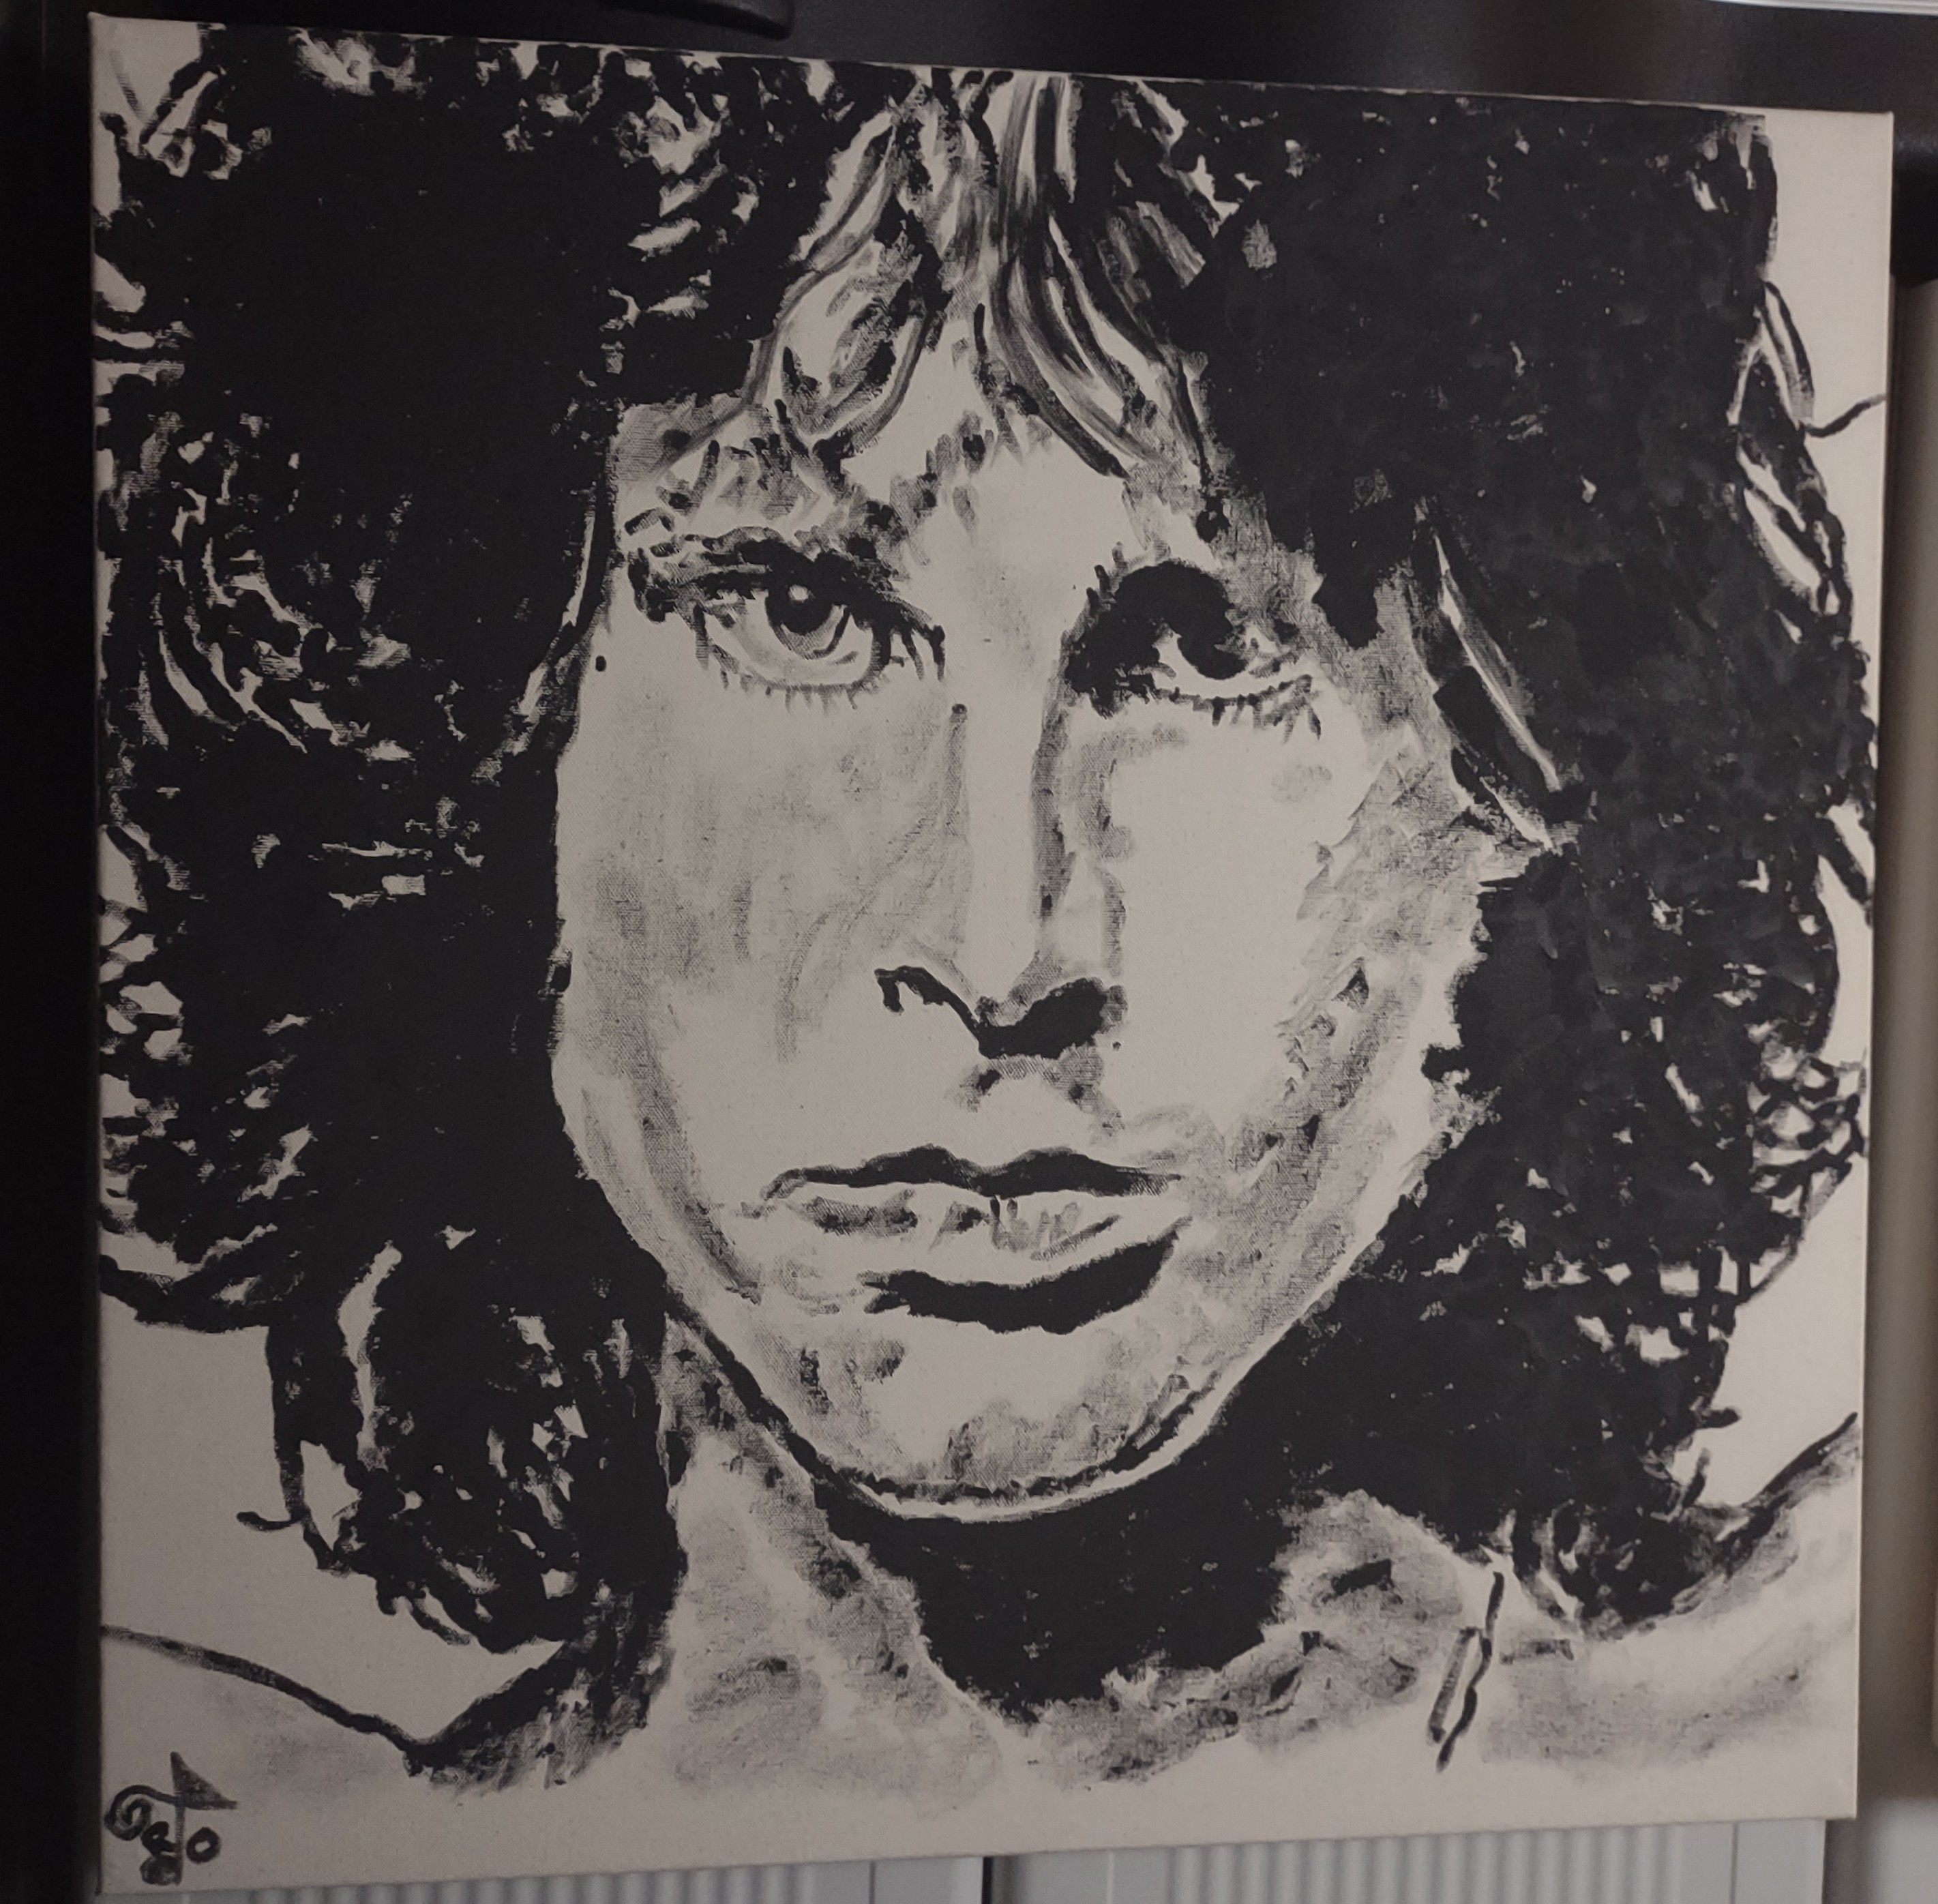 Painting of Jim Morrison to memorialize him for his poetic lyrics and melodic singing.